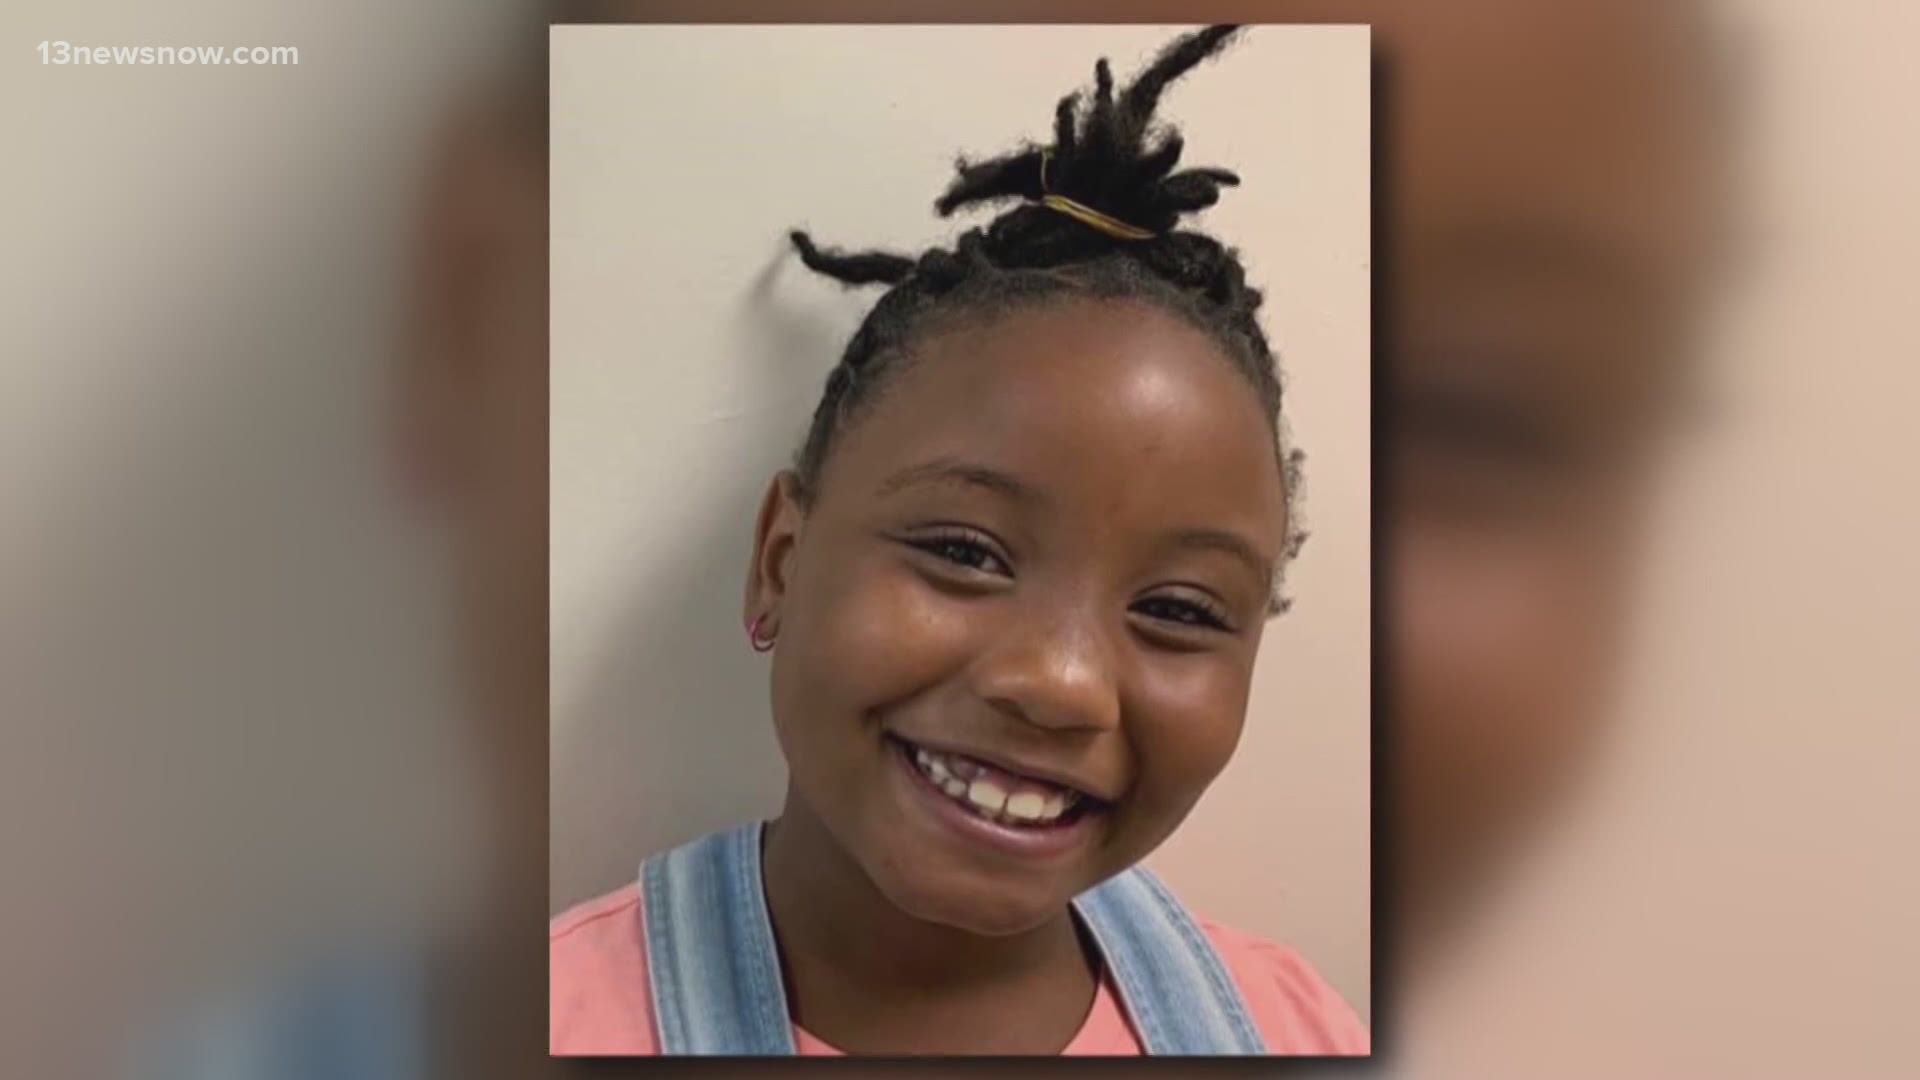 Authorities are offering a $5,000 reward for information on the person who shot and killed 9-year-old Makiia Slade.